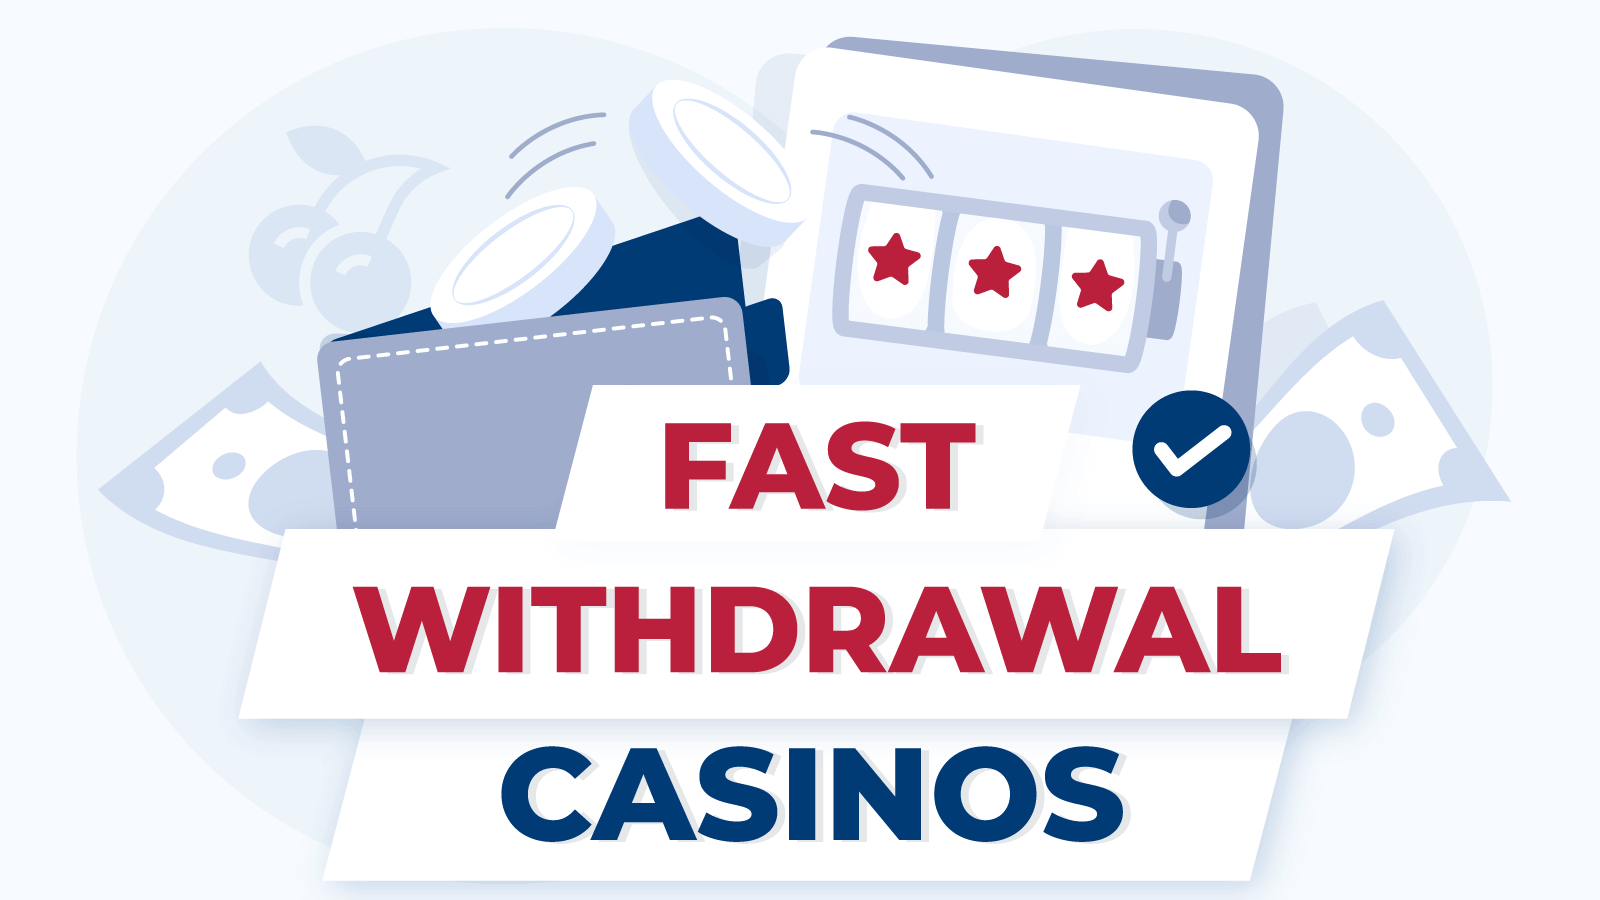 Fast Withdrawal Casinos